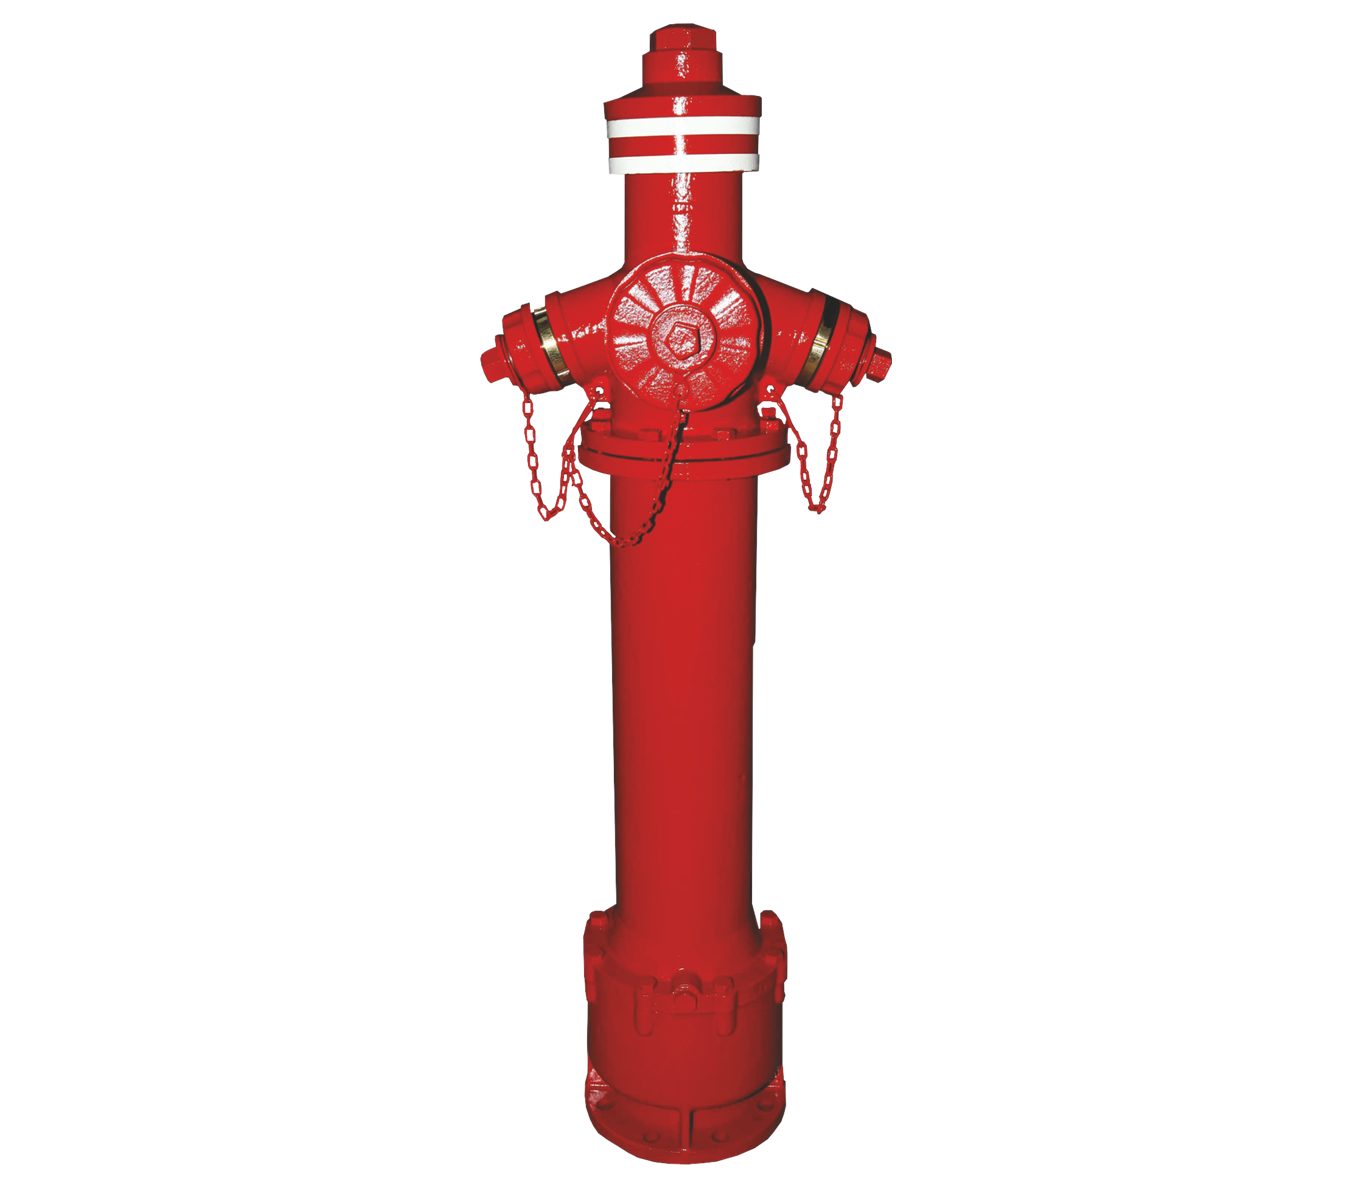 Fire hydrant-technic- PNG image with transparent background